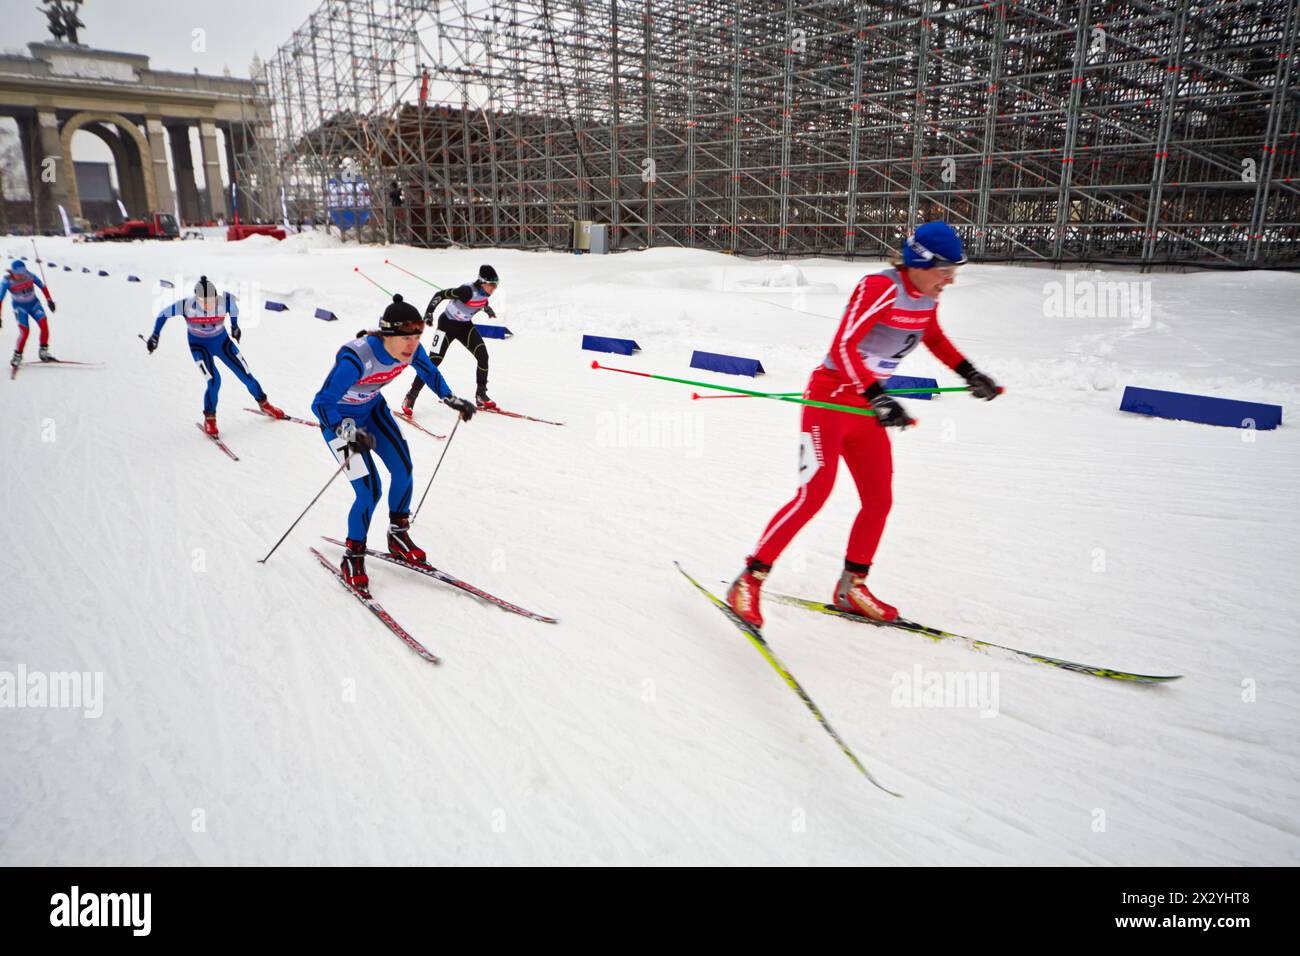 MOSCOW - FEB 9: Female skiers during FIS Continental Cup ski racing in category of city-event, February 9, 2013, Moscow, Russia. Track is constructed Stock Photo